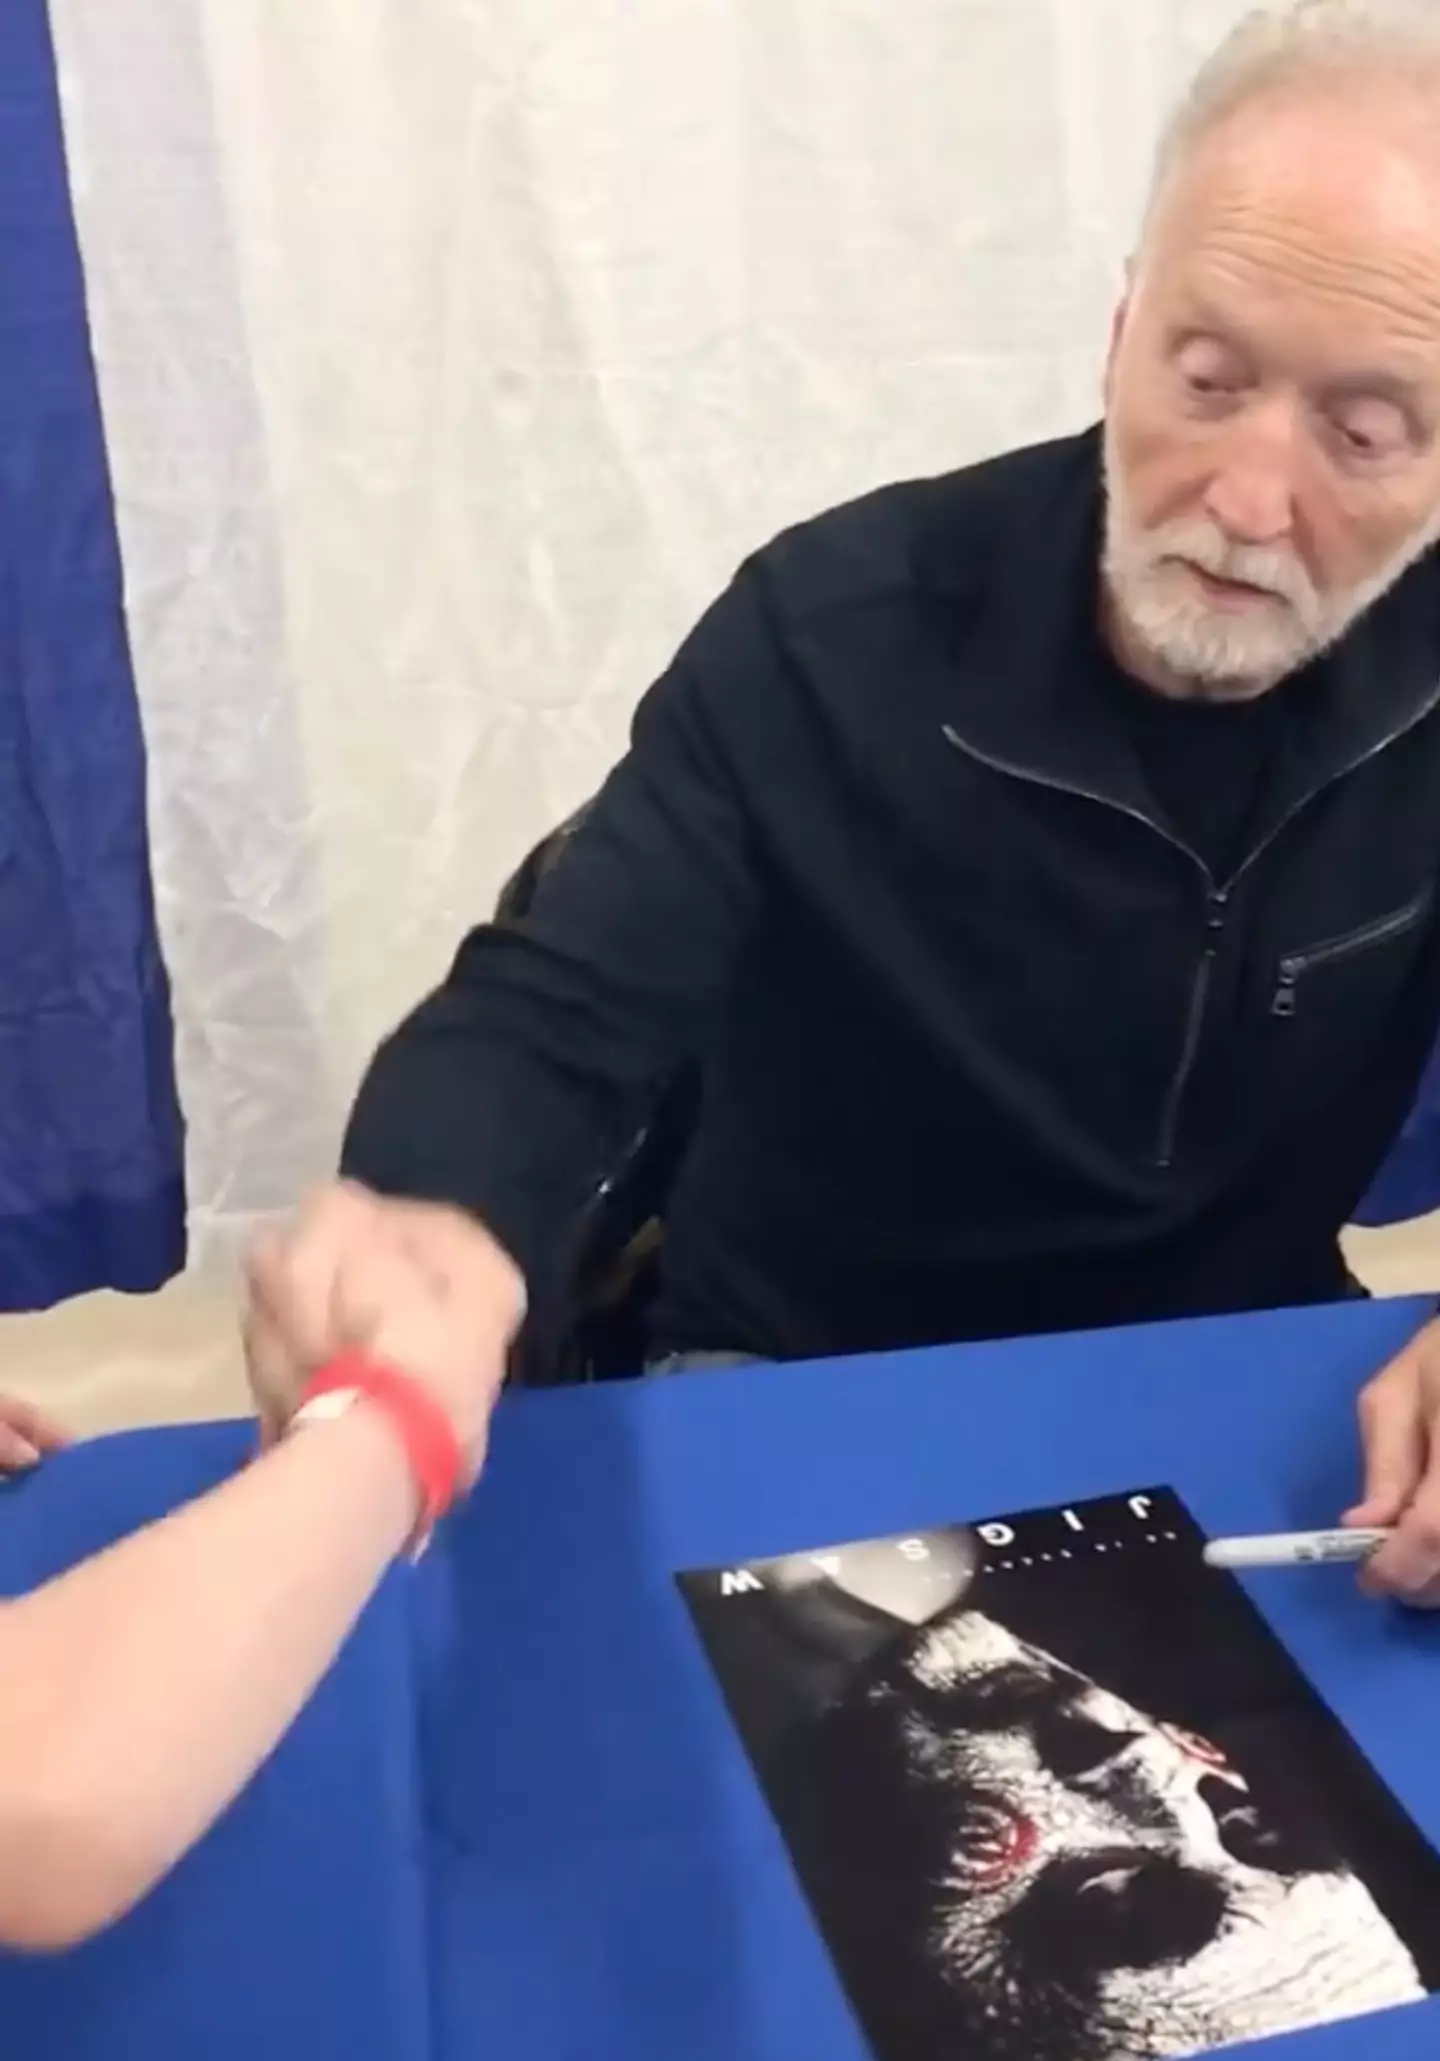 Tobin Bell gave the young lad a fist bump and a handshake.